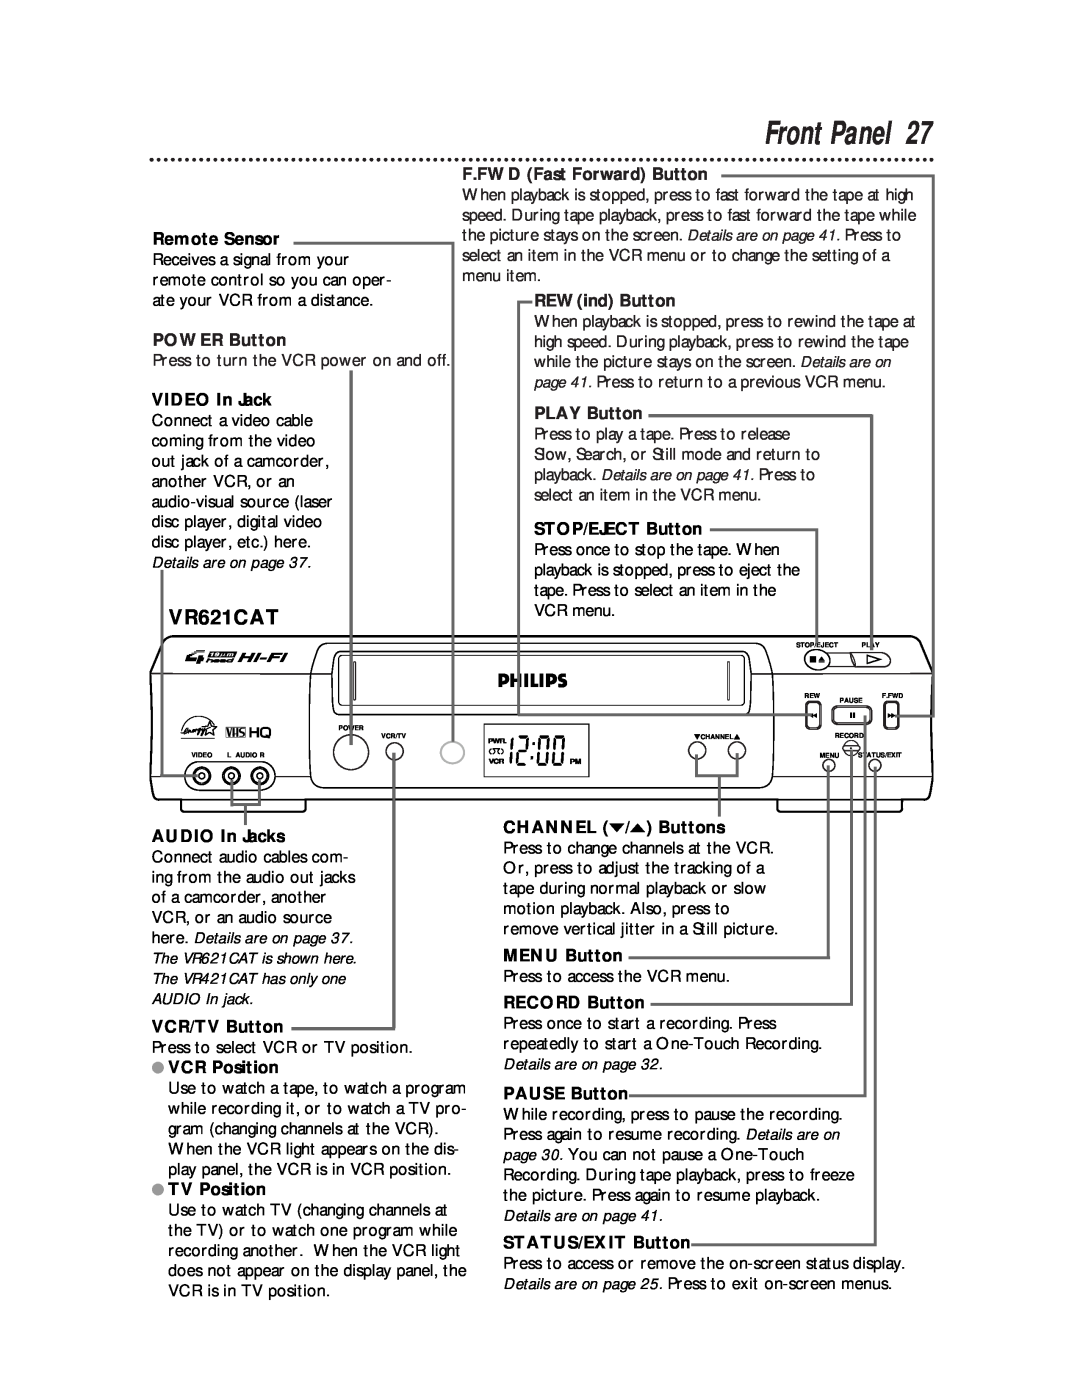 Philips manual Front Panel, here. Details are on page, The VR621CAT is shown here, The VR421CAT has only one 